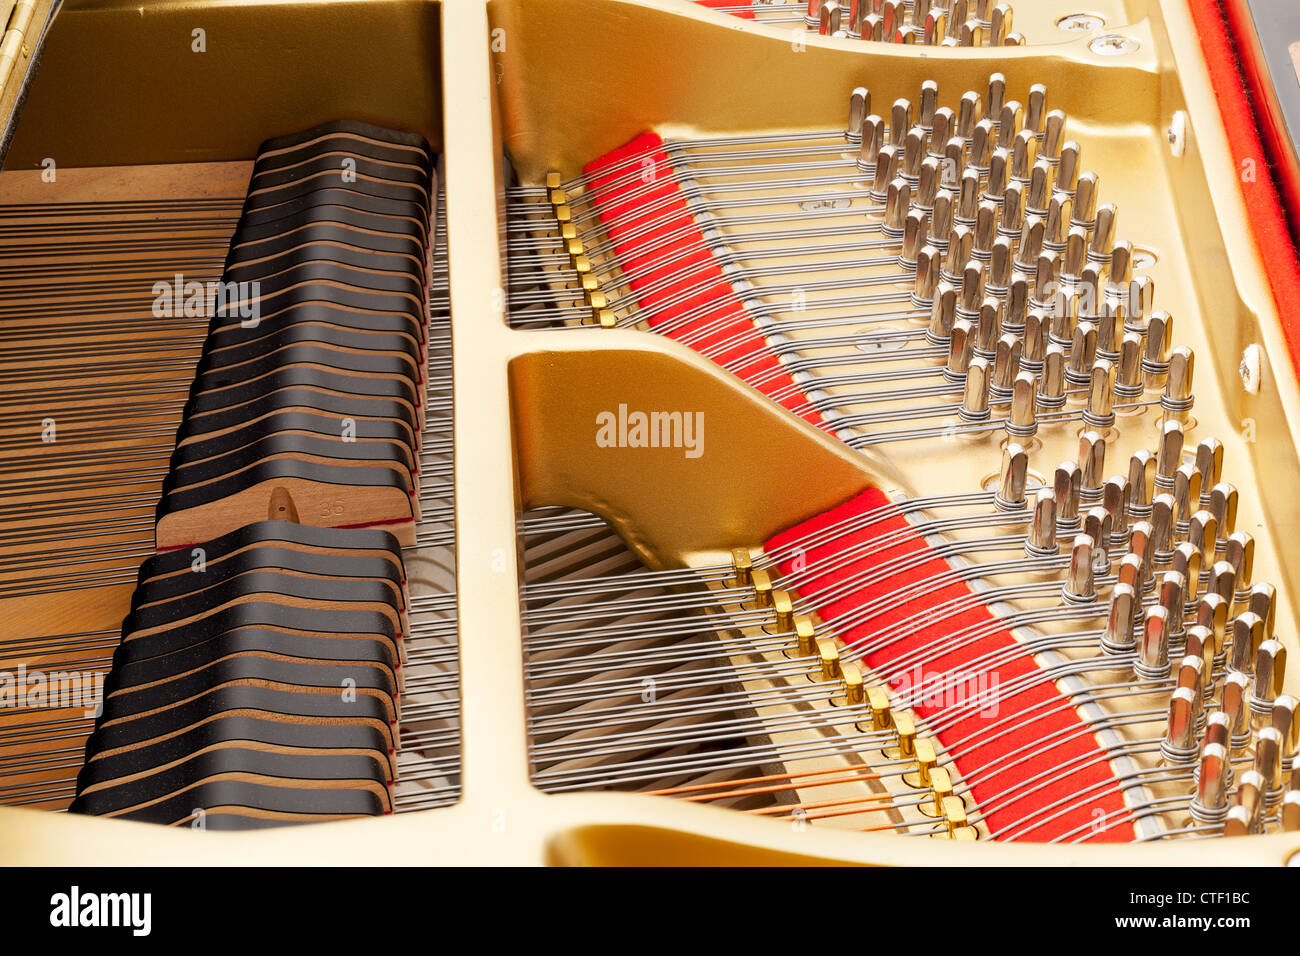 Detailed interior of grand piano showing the strings, pegs, sound board with focus sharp across image Stock Photo